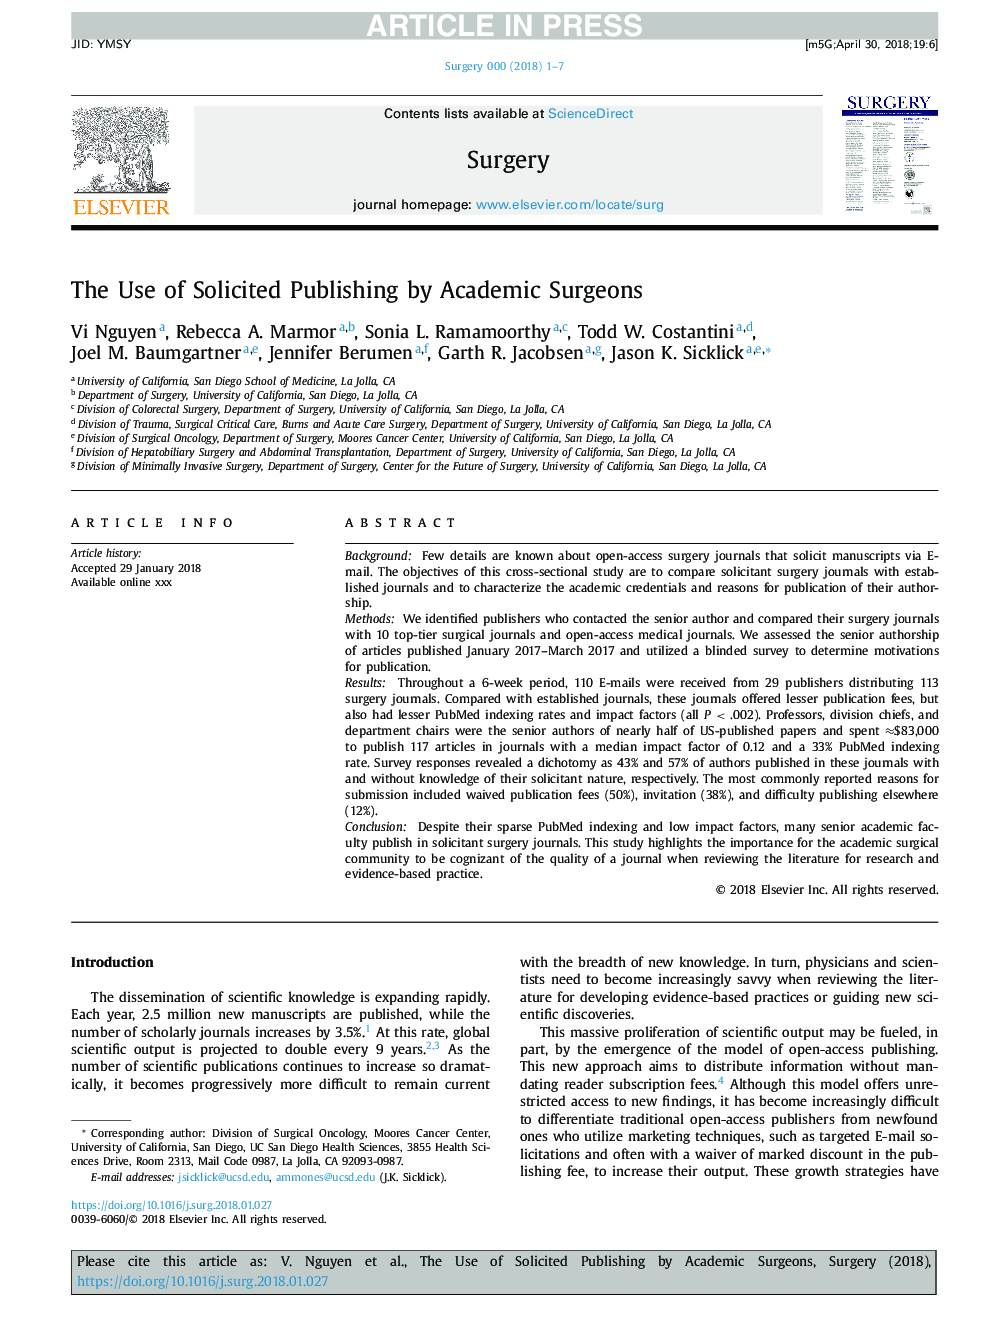 The Use of Solicited Publishing by Academic Surgeons